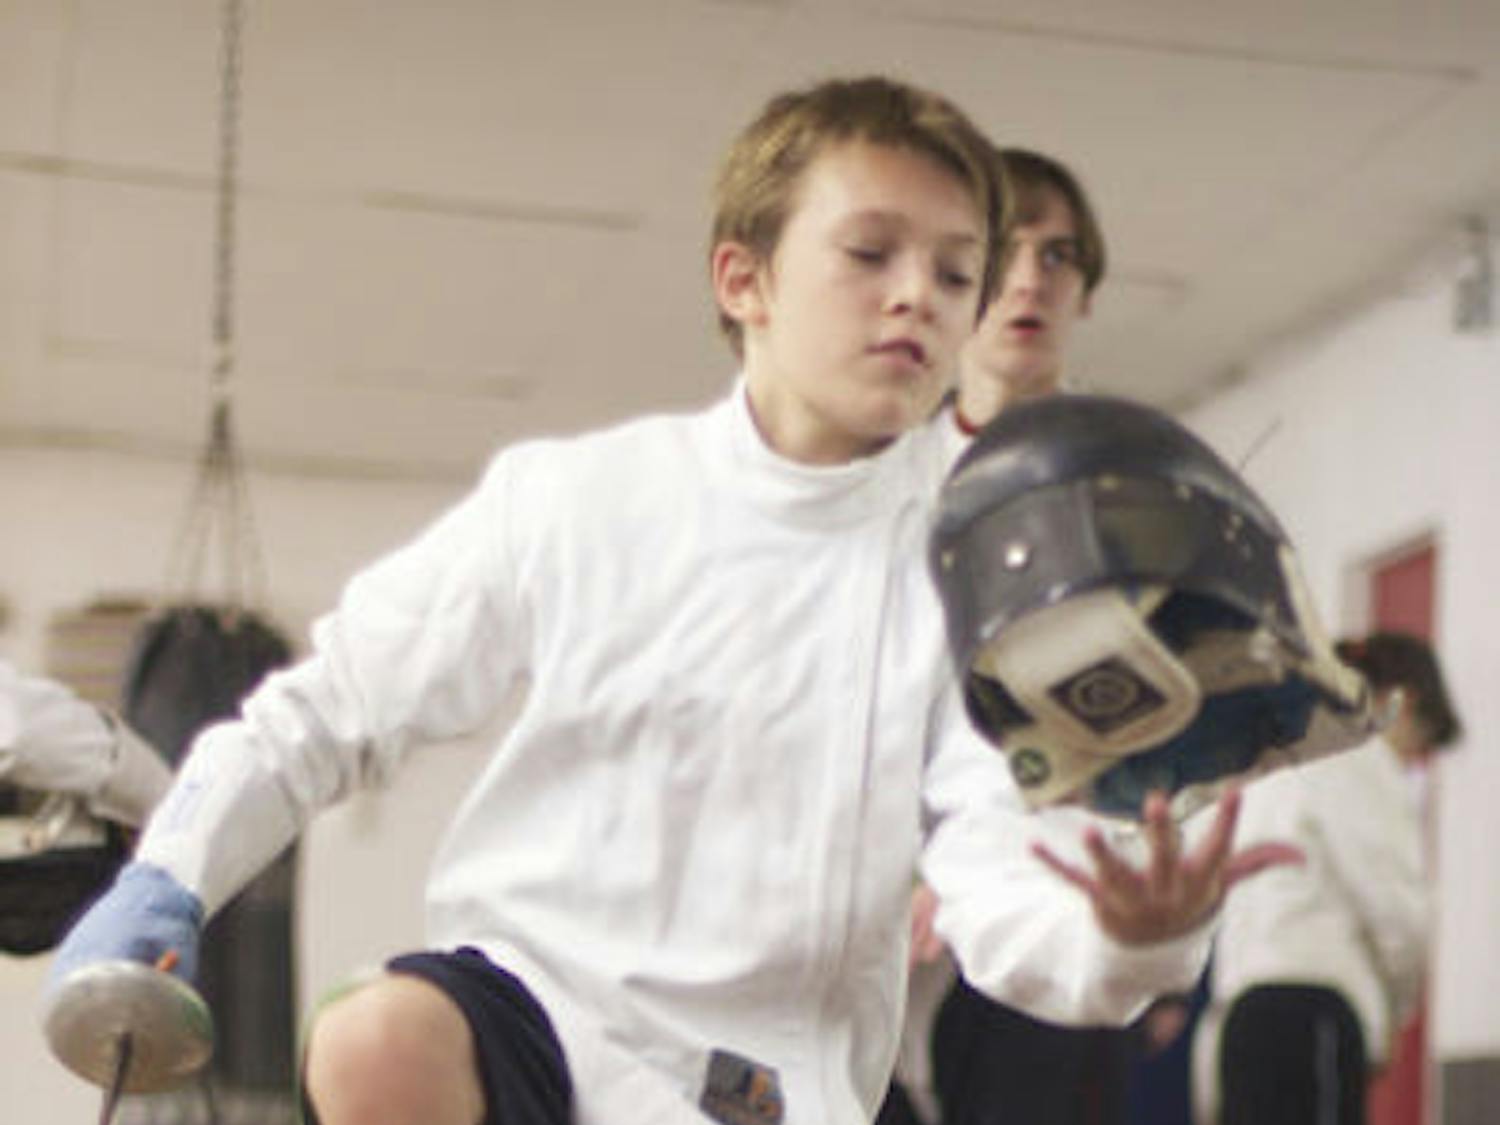 Ariel Levites, a 13-year-old, fences at Unified Training Center for Fencers Club Gainesville on Tuesday. Members are training for a competition.